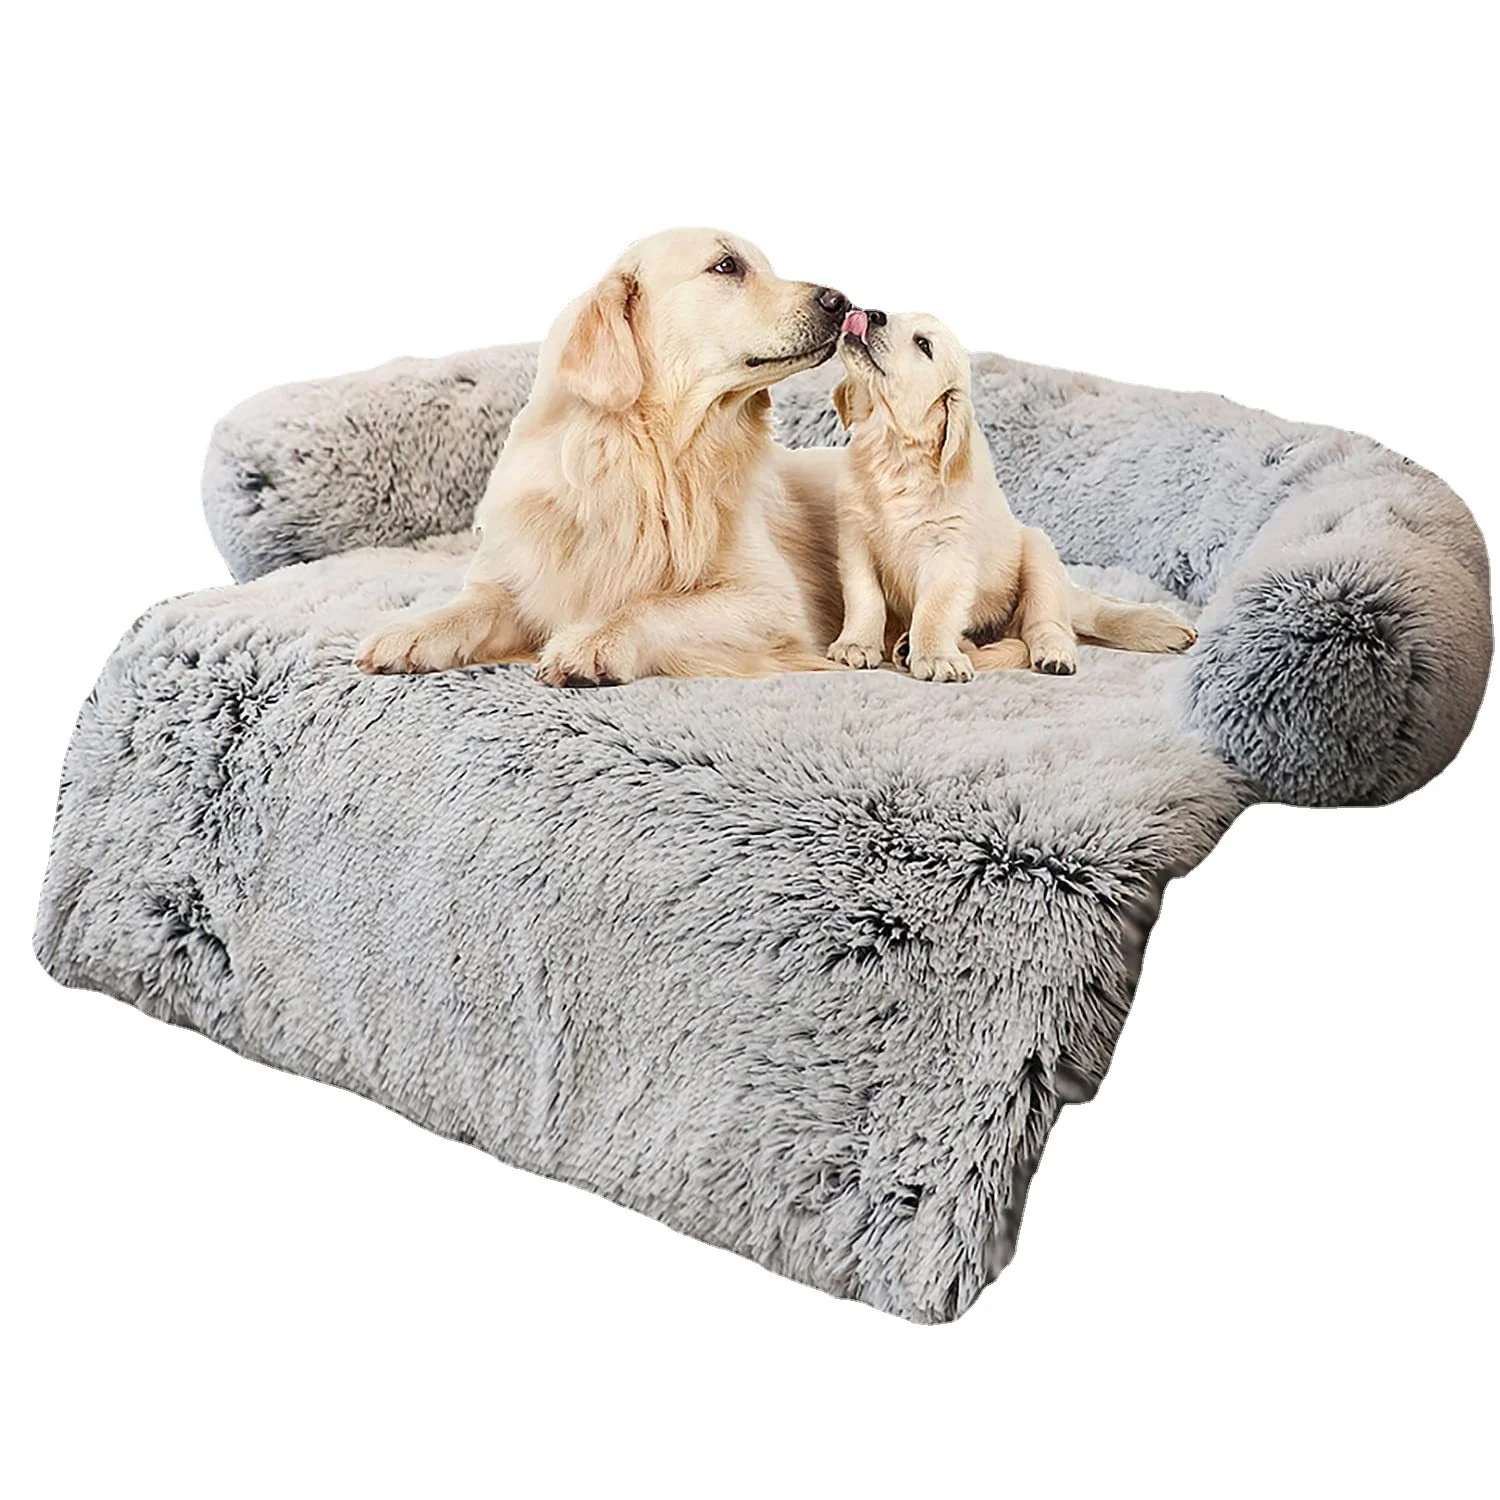 

Sohpety Eco Friendly Designers Washable Pet Cat Orthopedic Memory Foam With Zipper Removable Luxury Dog Sofa Bed, Picture shows